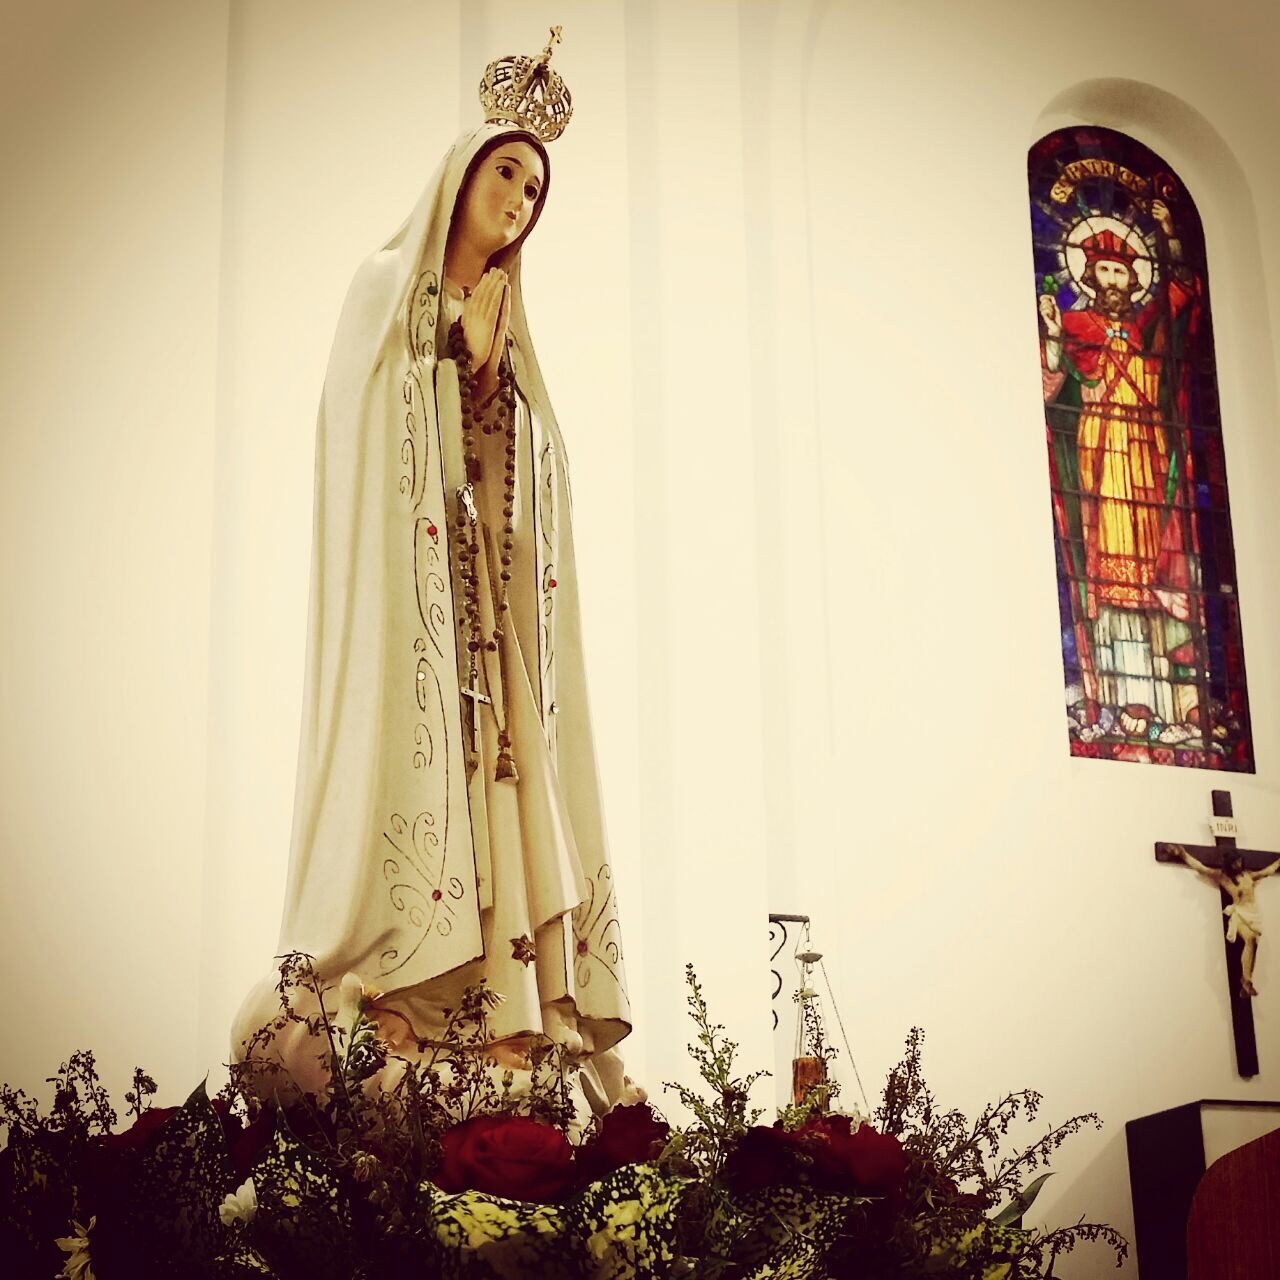 Commemorating the Centennial Anniversary of Our Lady of Fatima